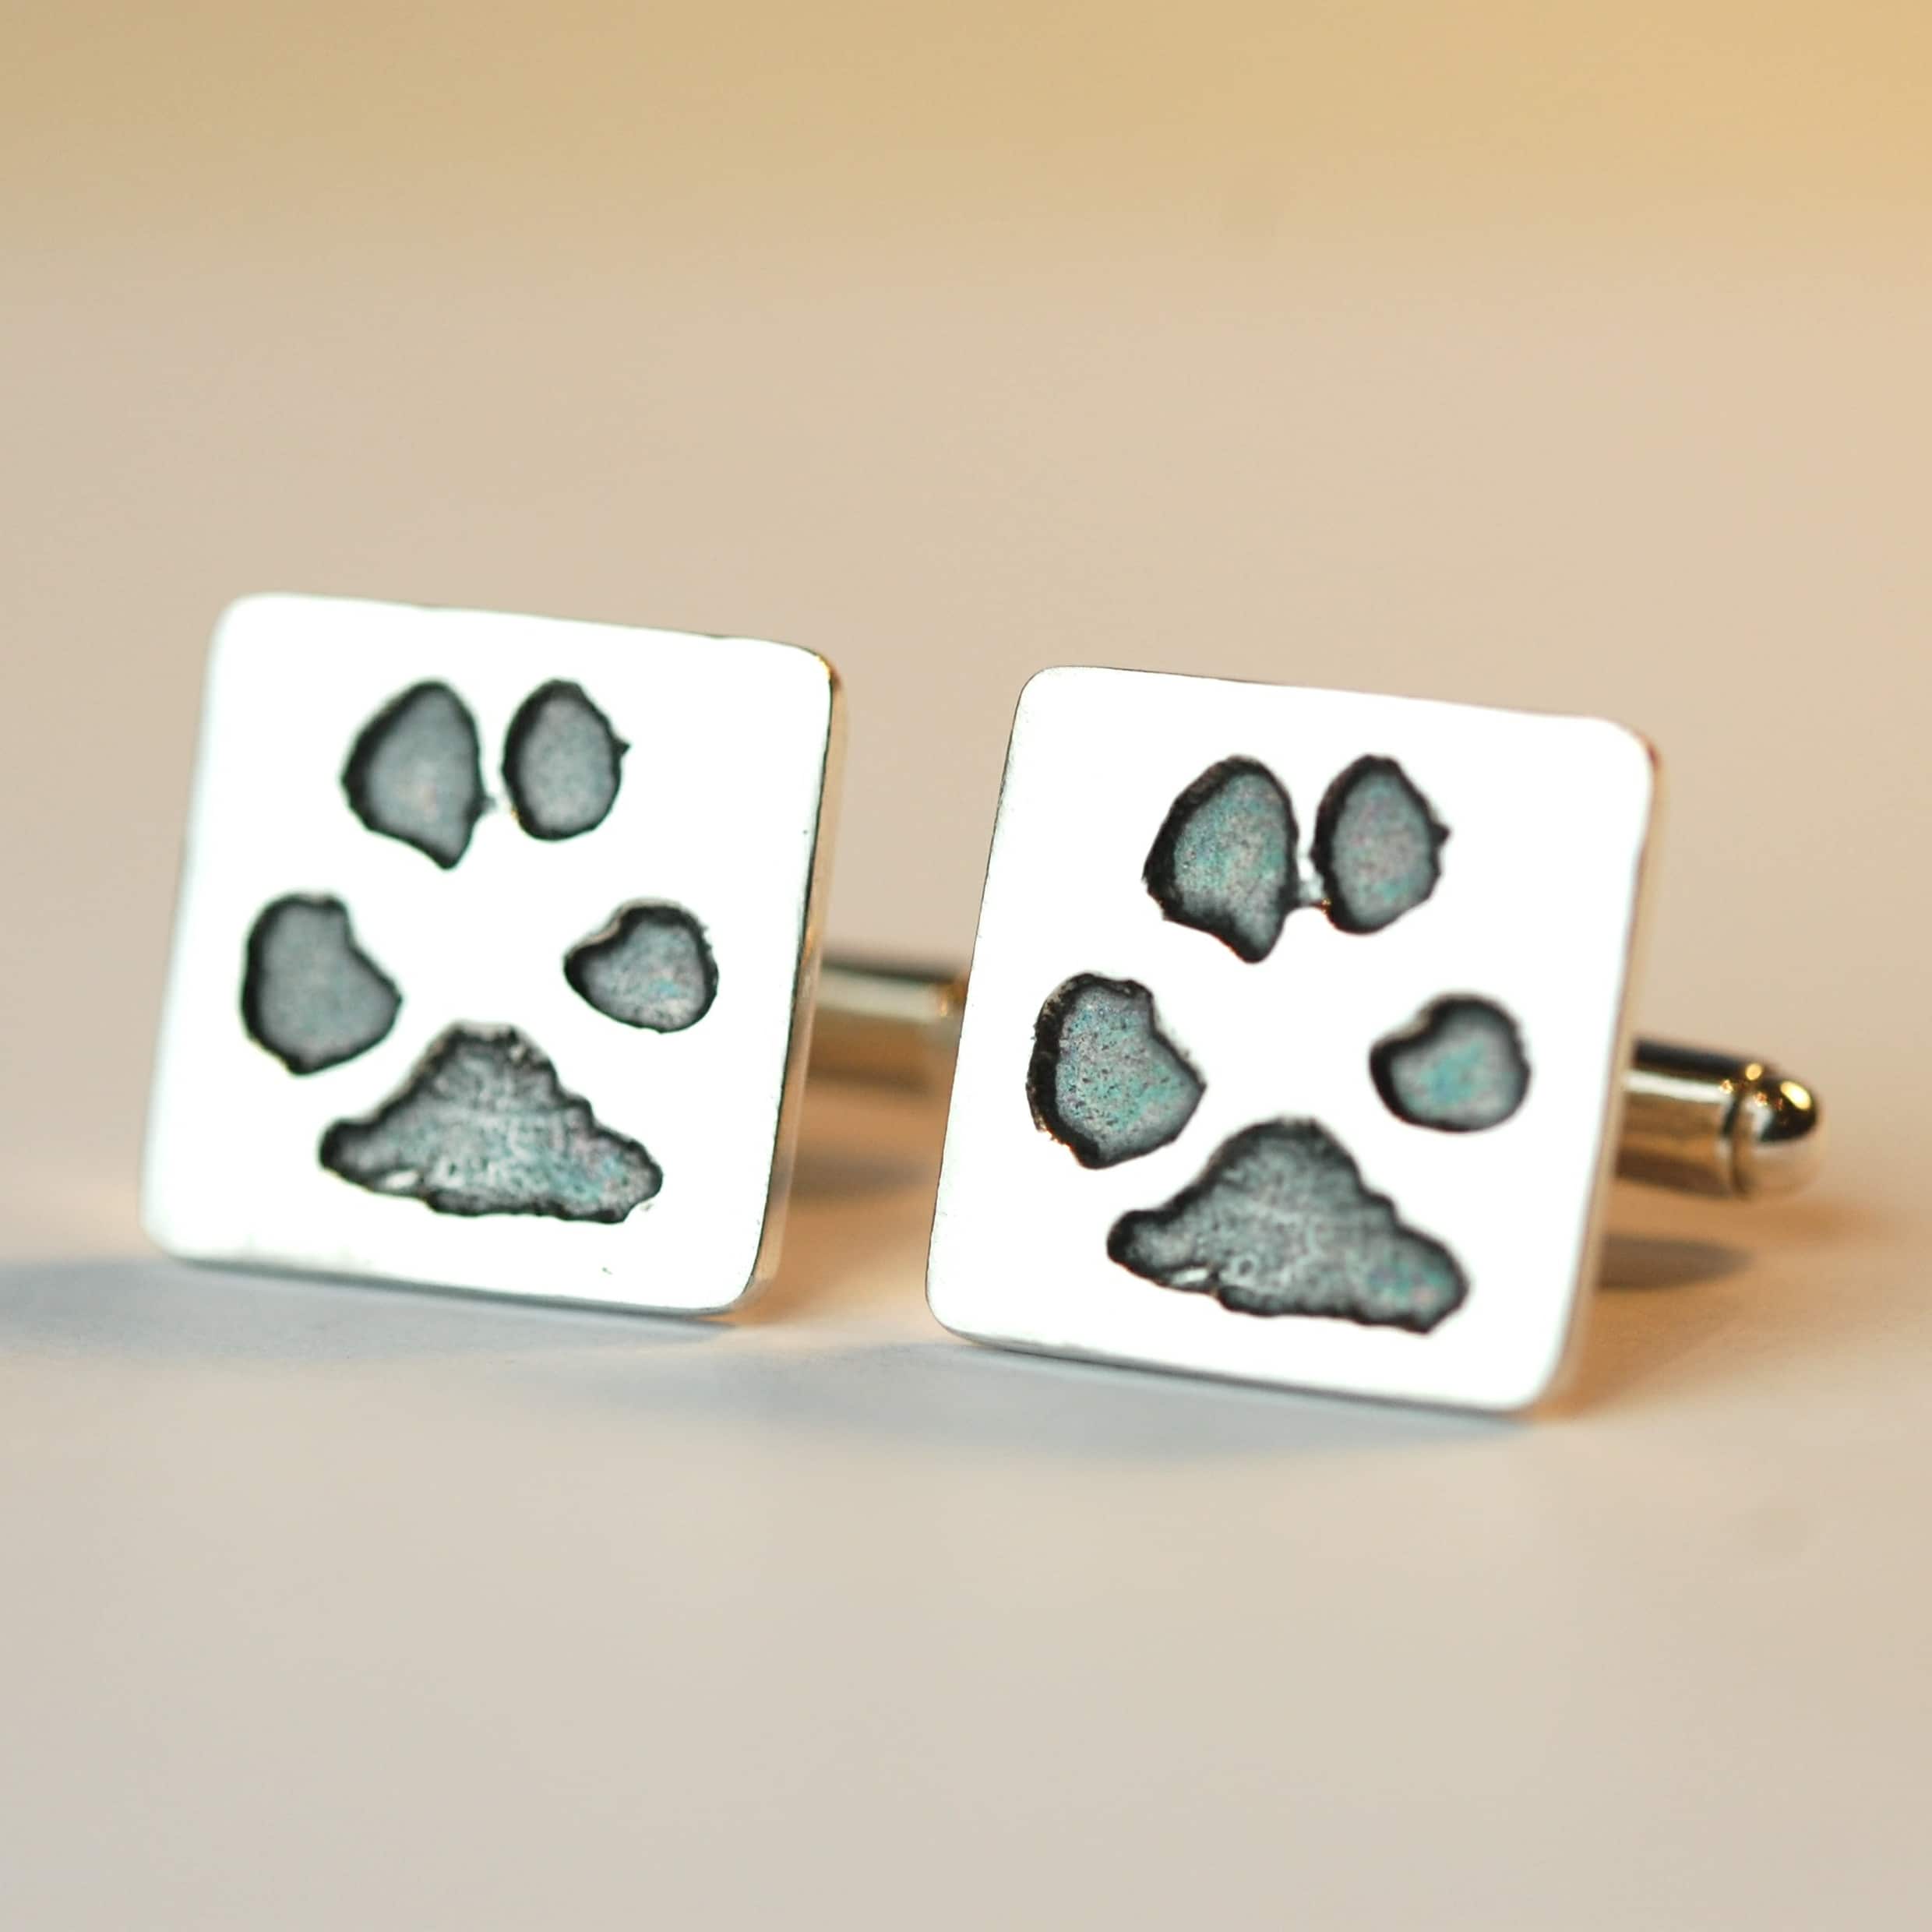 Sterling silver cufflnks with your pet's unique paw prints